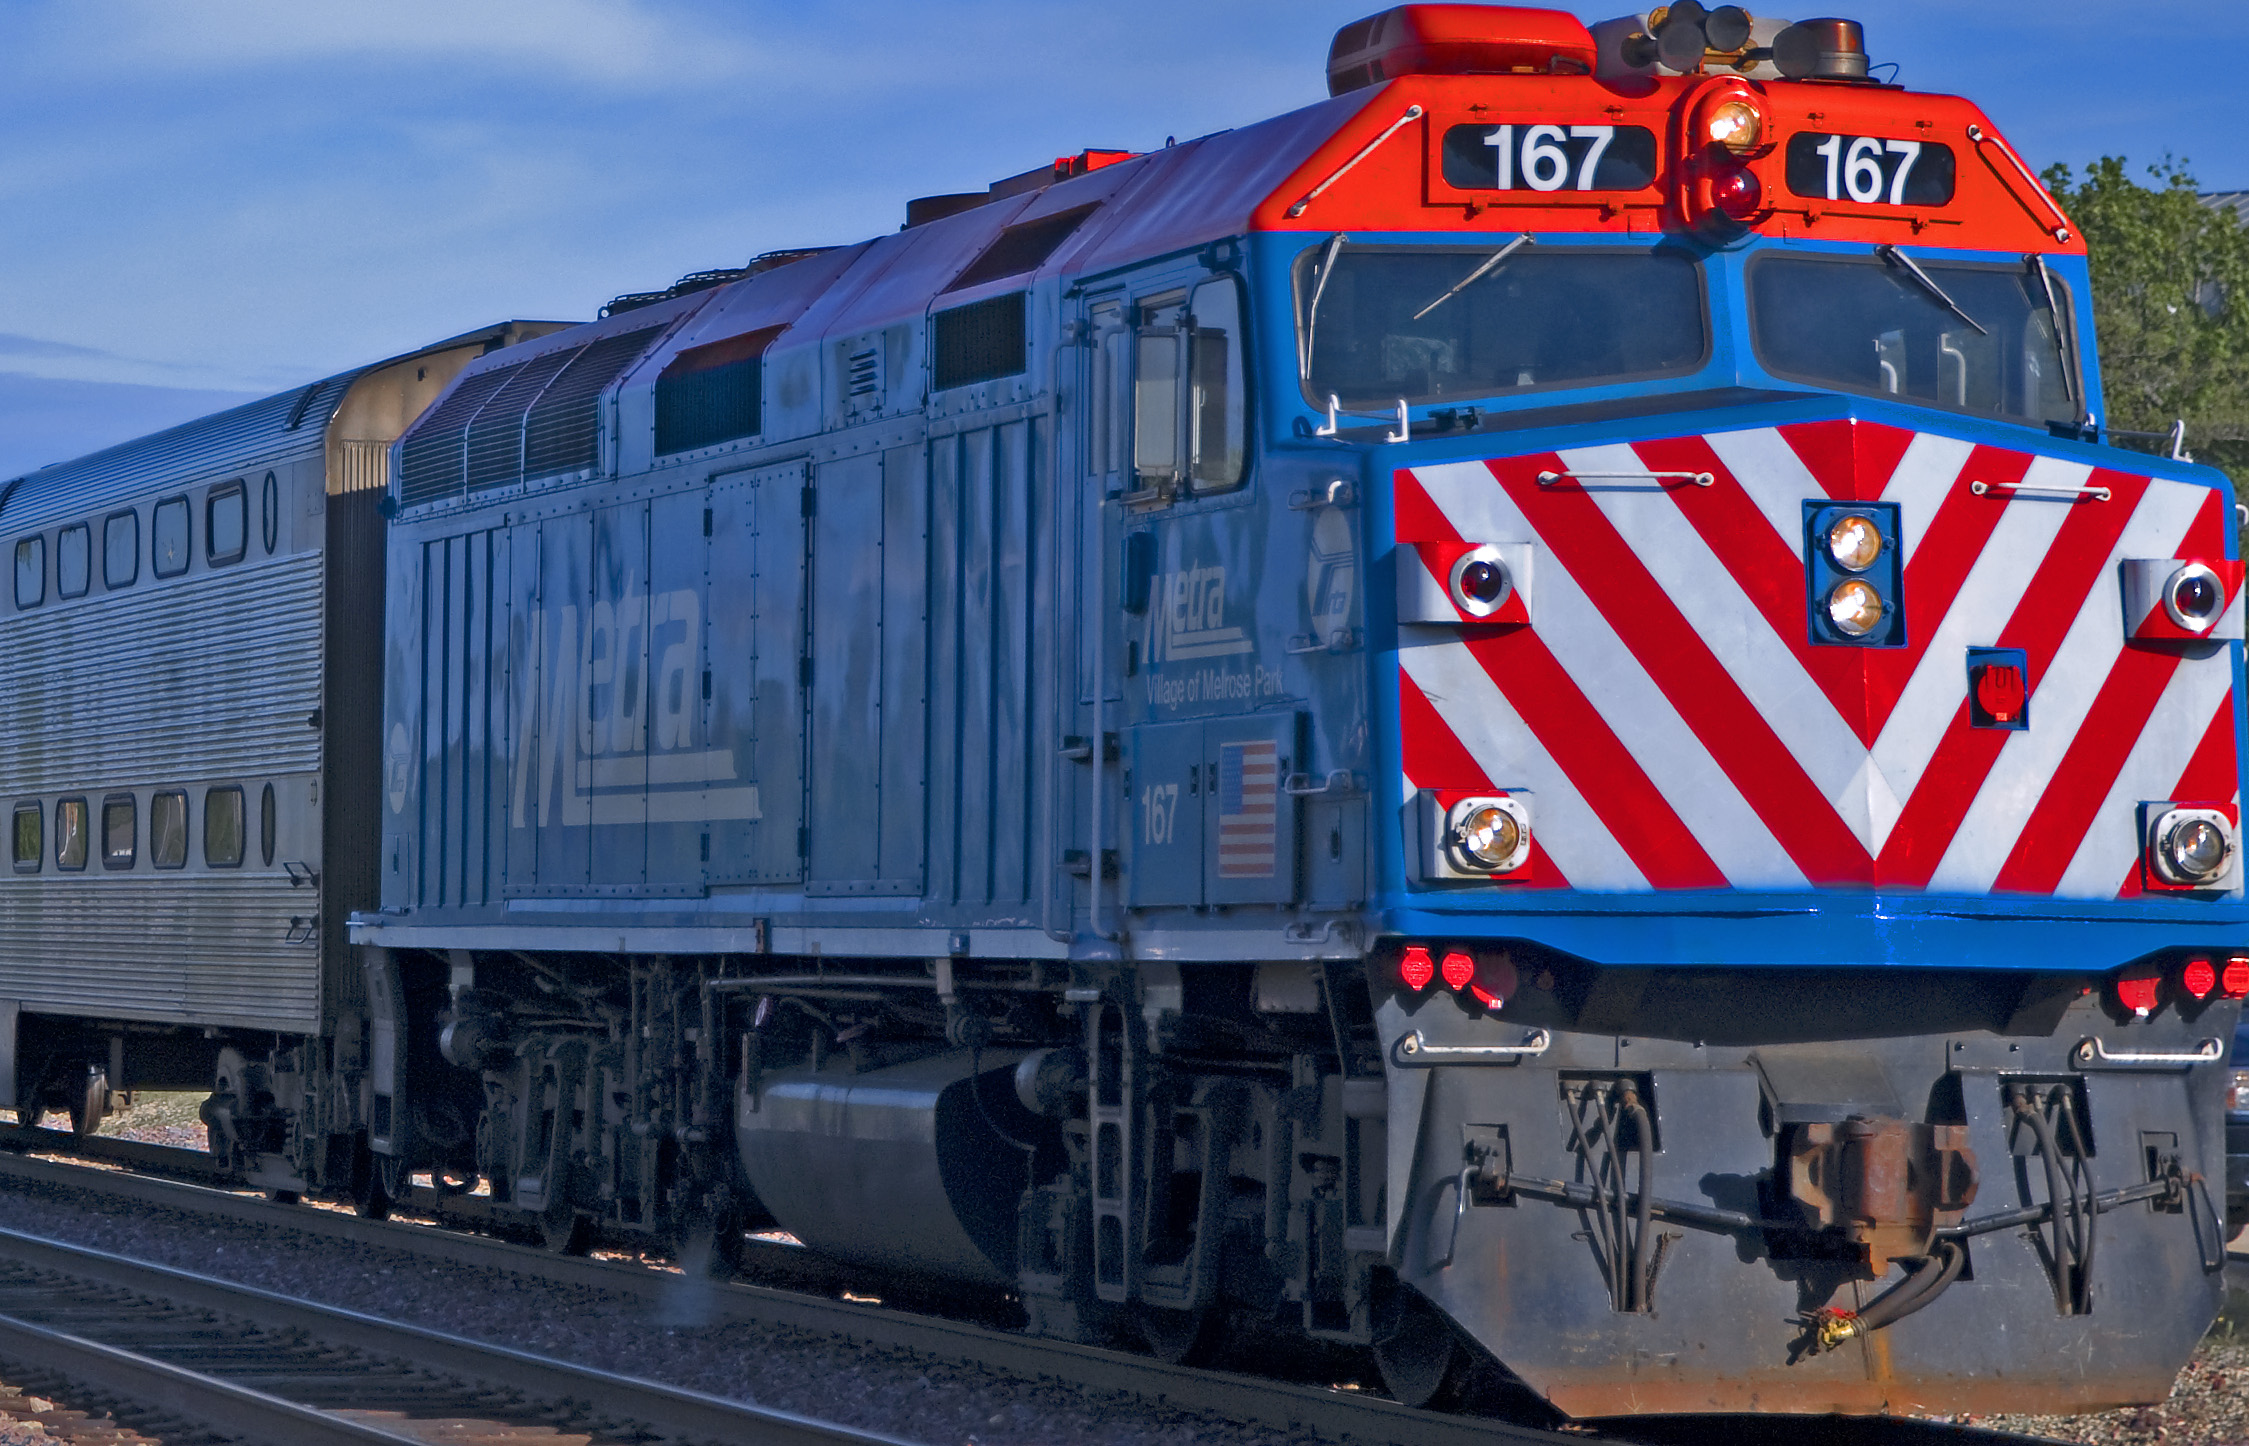 a train on a track is painted red, white and blue